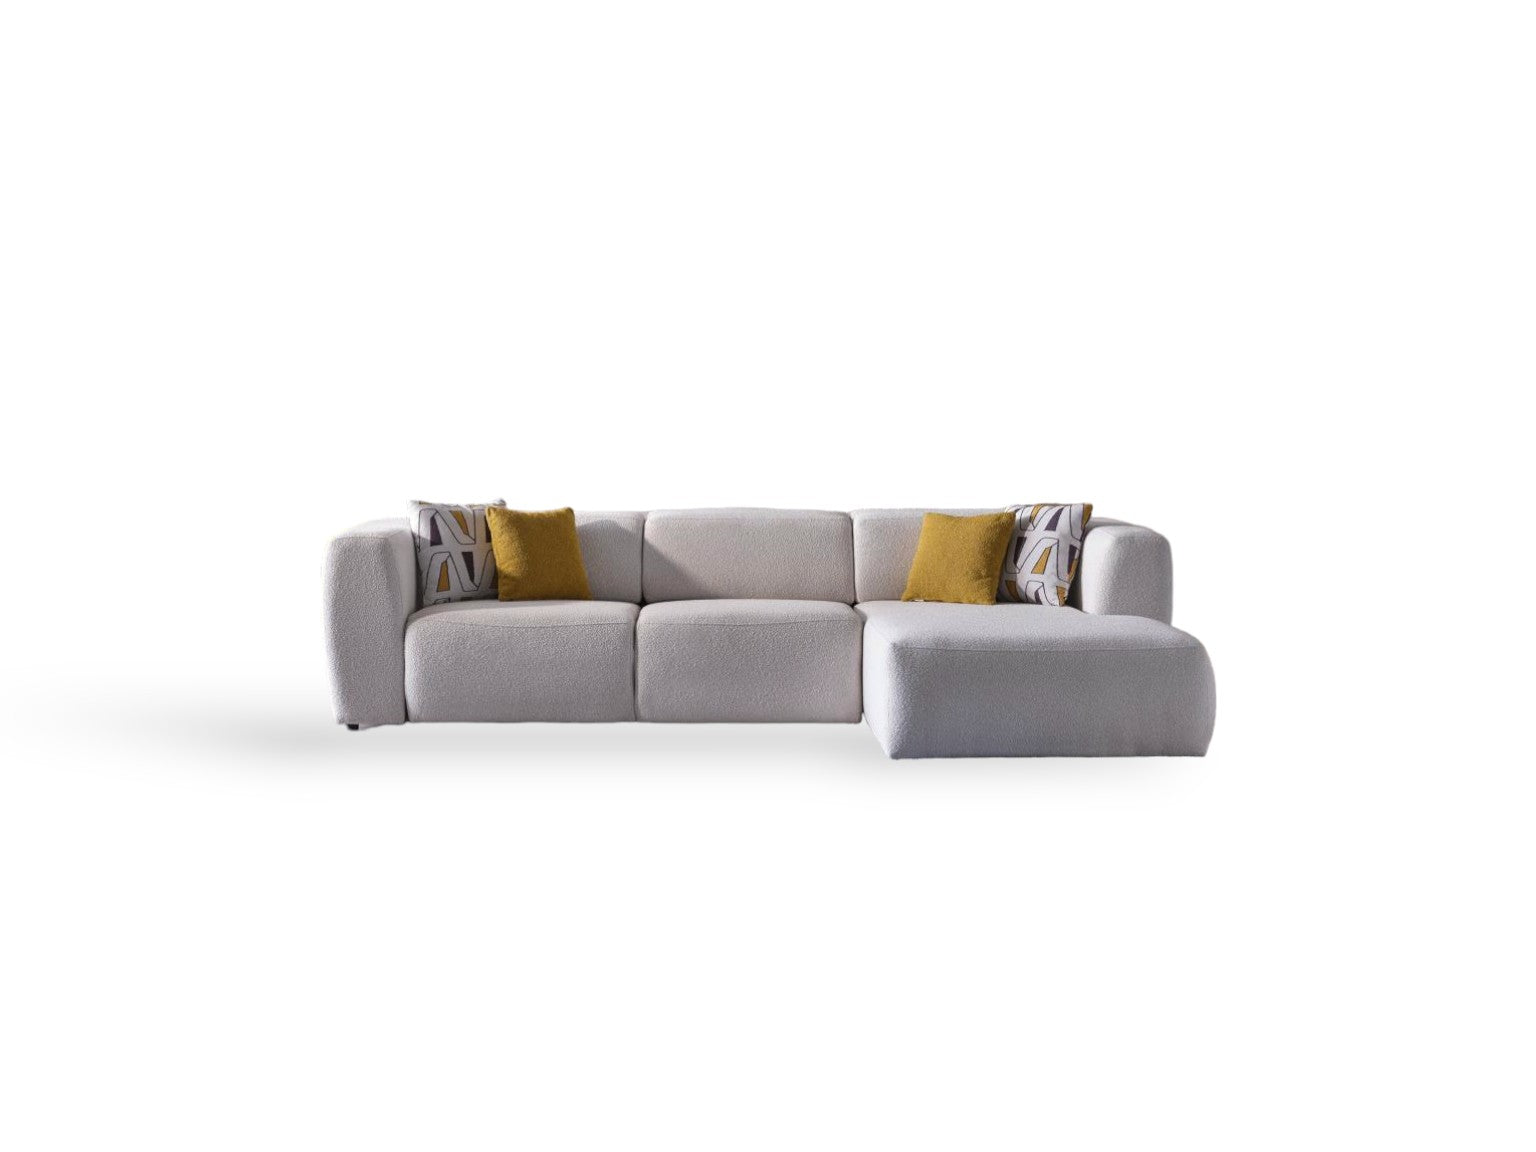 Picasso Sleeper Sectional